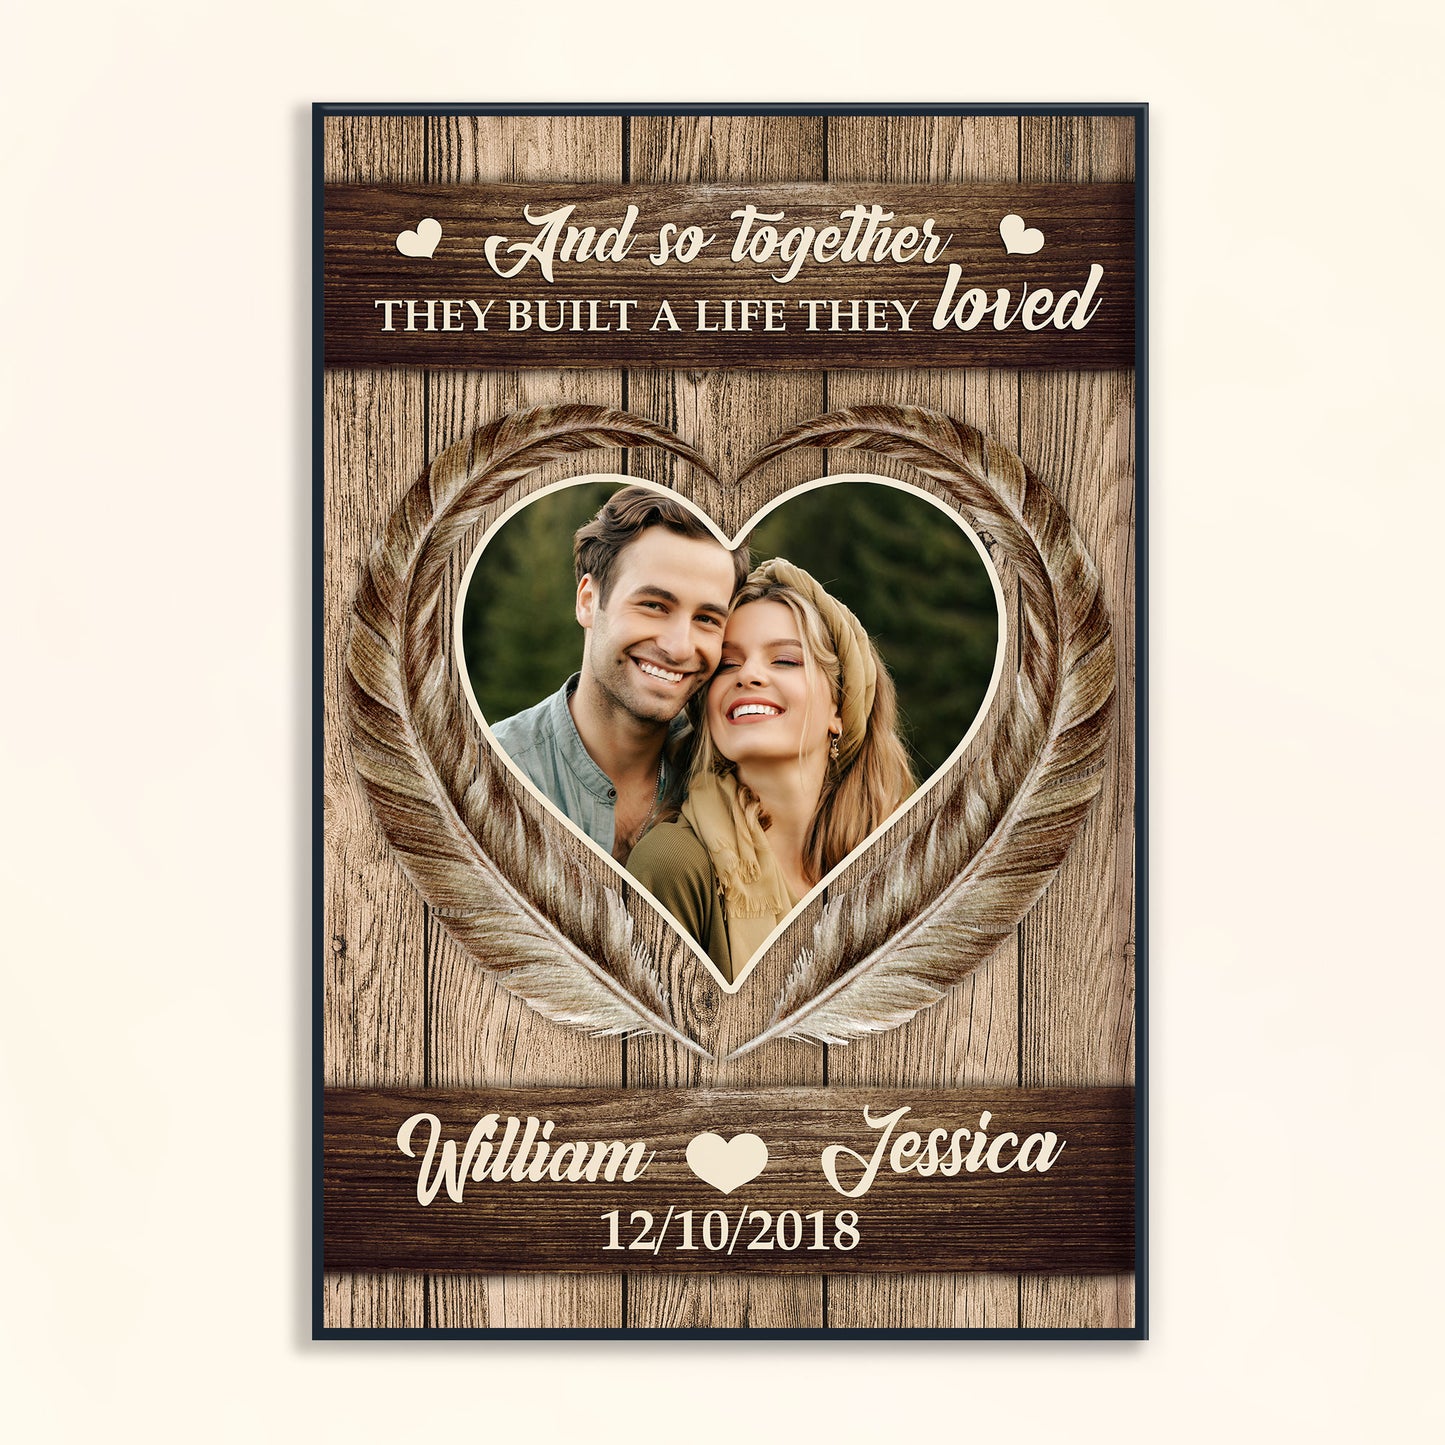 And So Together They Built A Life They Loved - Personalized Photo Poster/Wrapped Canvas